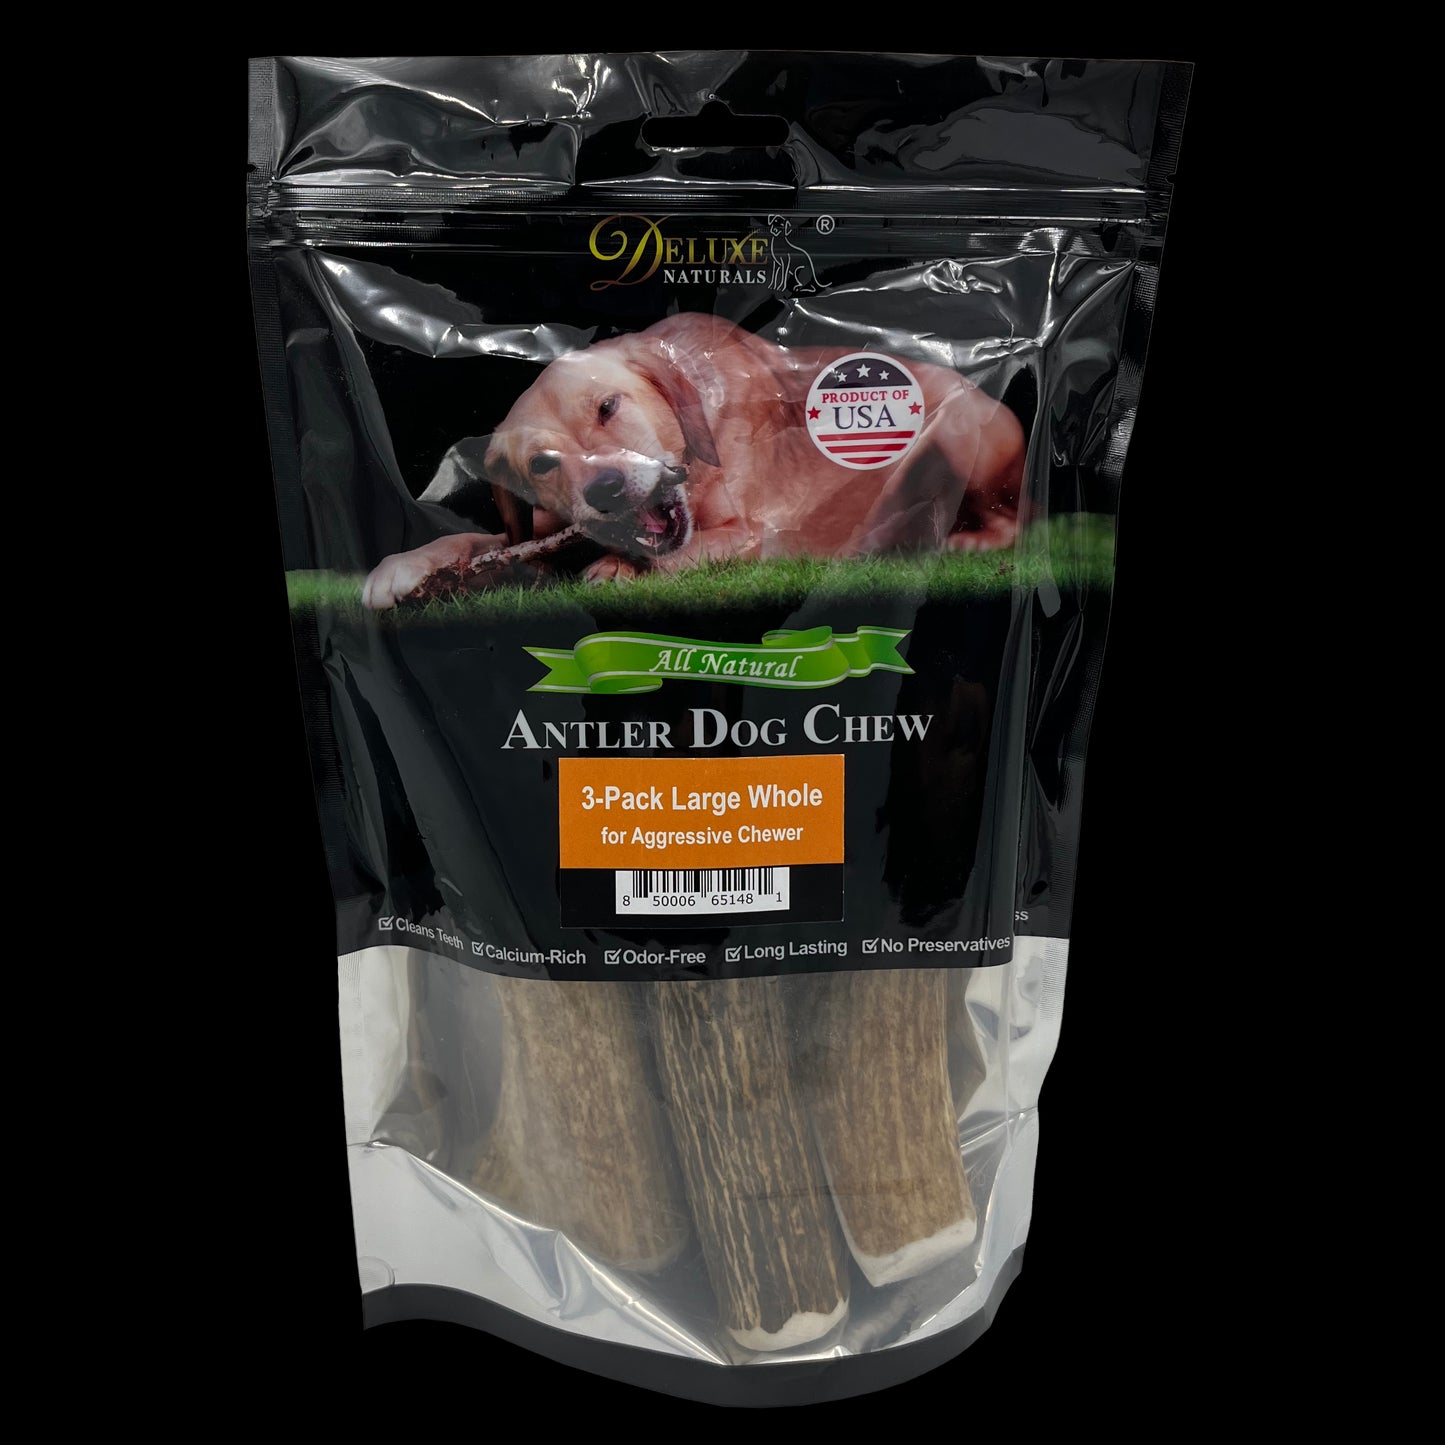 Deluxe Naturals 3-Pack Elk Antler Dog Chew - Large Whole